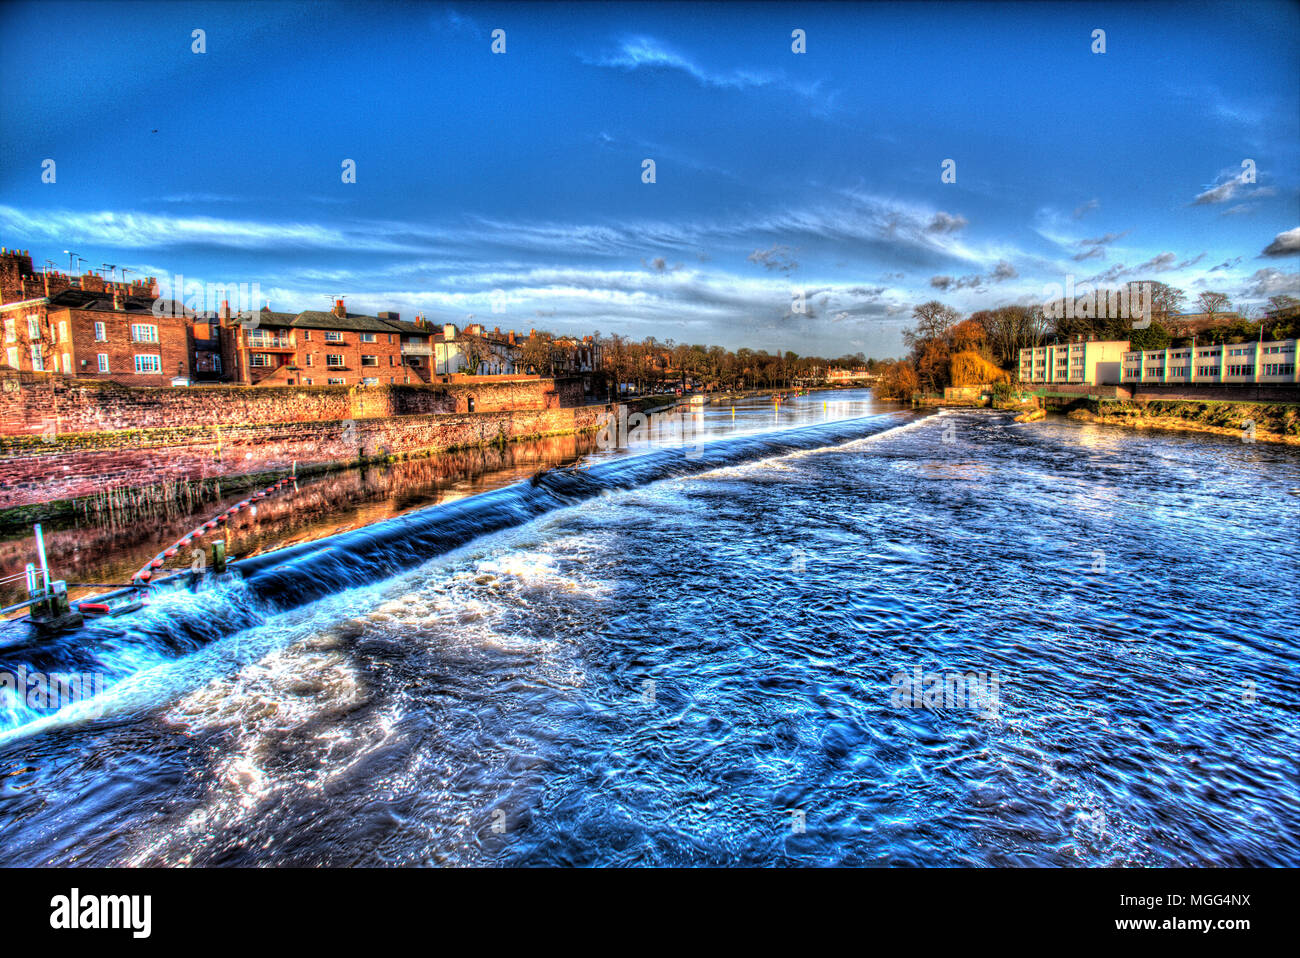 City of Chester, England. Artistic view of the River Dee, with Chester Walls on the left of the image and the Groves in the background. Stock Photo